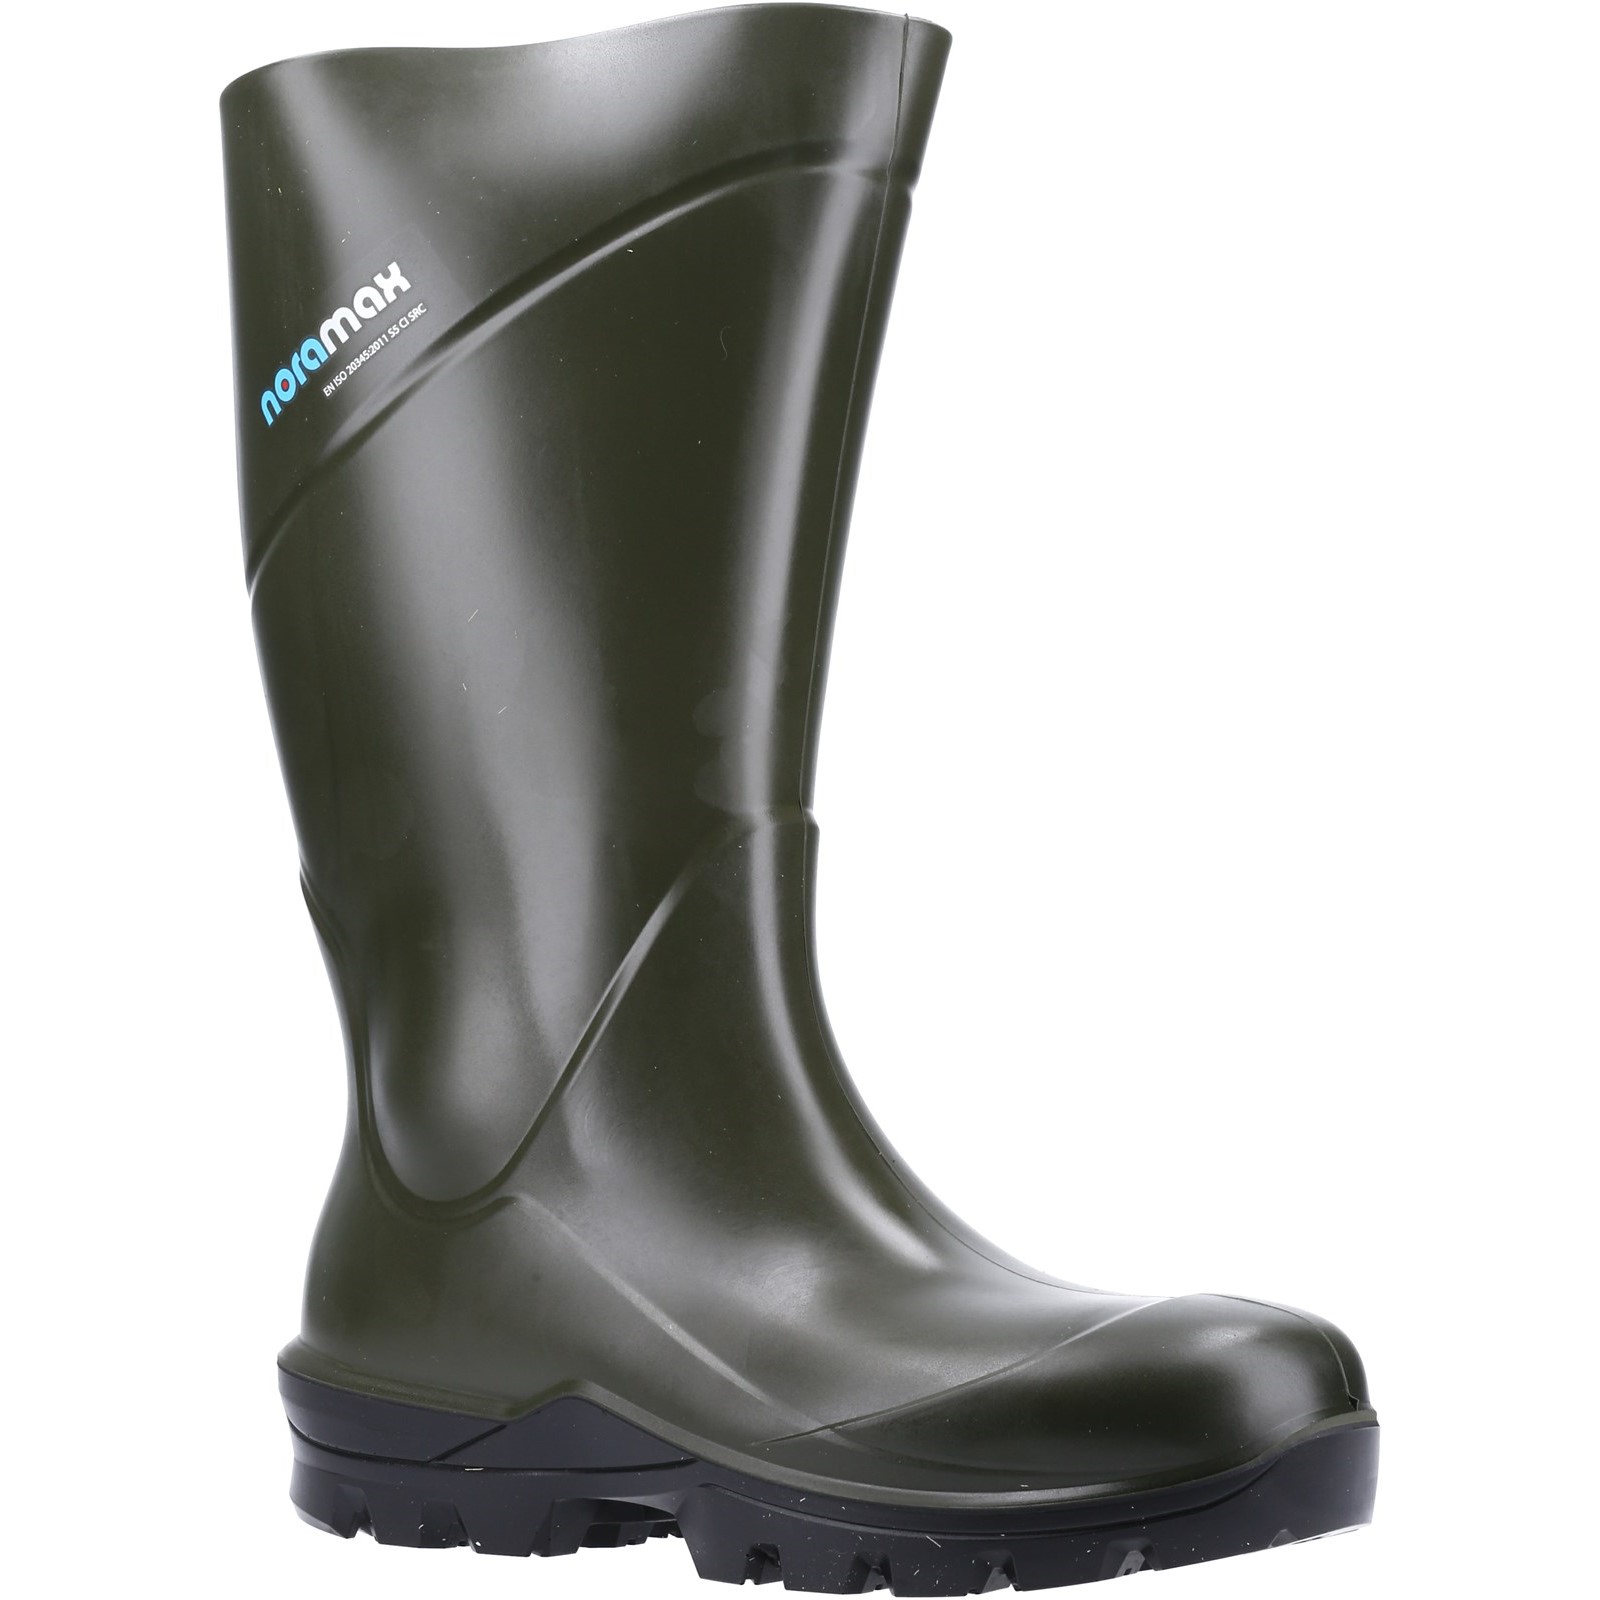 Nora Safety Wellingtons